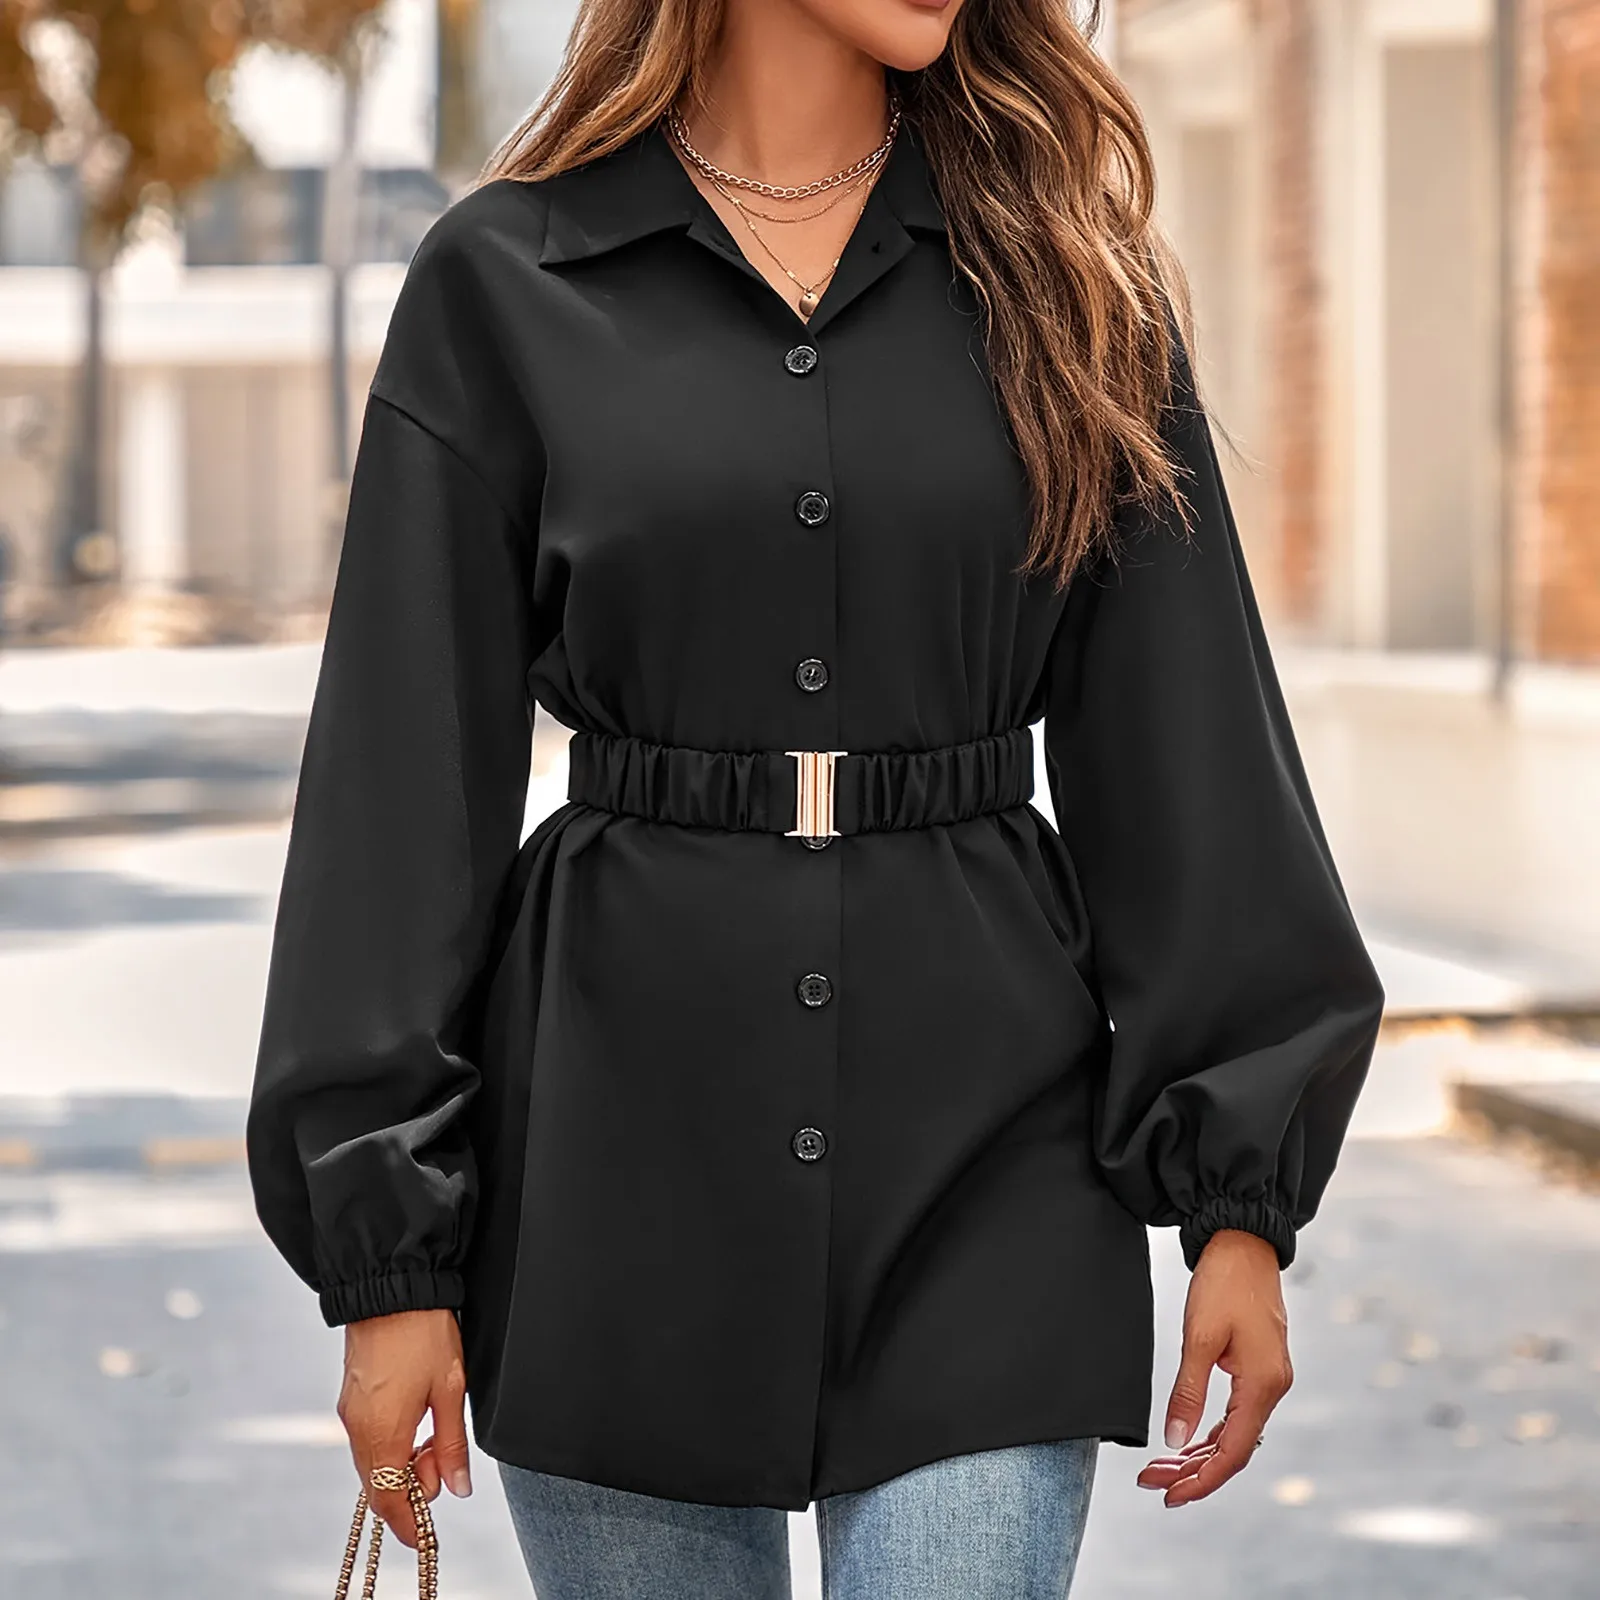 

Womens Fashion Blouse With Waist Belt V Neck Solid Lantern Long Sleeve Top Long Shirts & Blouses Autumn Blusa Mujer Moda Camisas